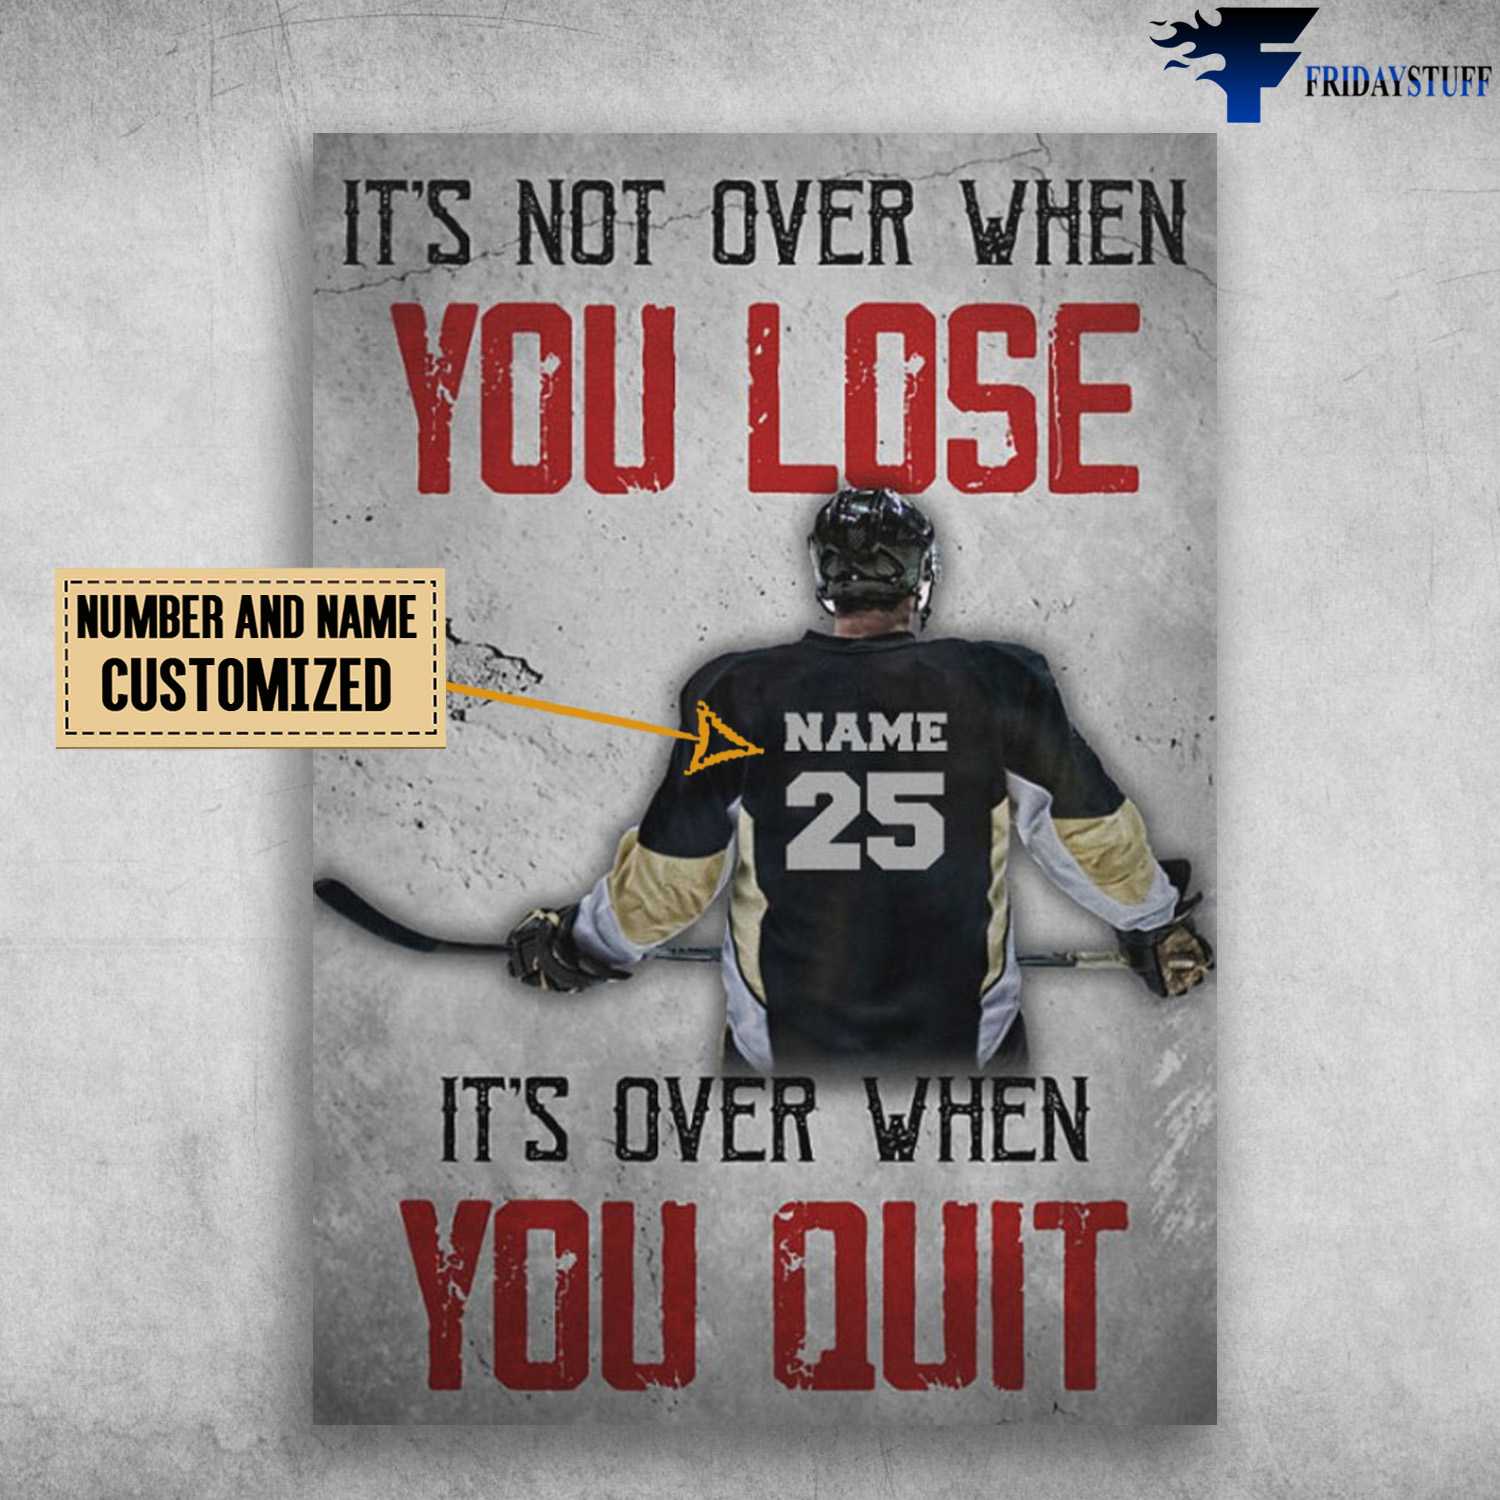 Hockey Player, Hockey Poster, It's Not Over When You Lose, It's Over When You Quit